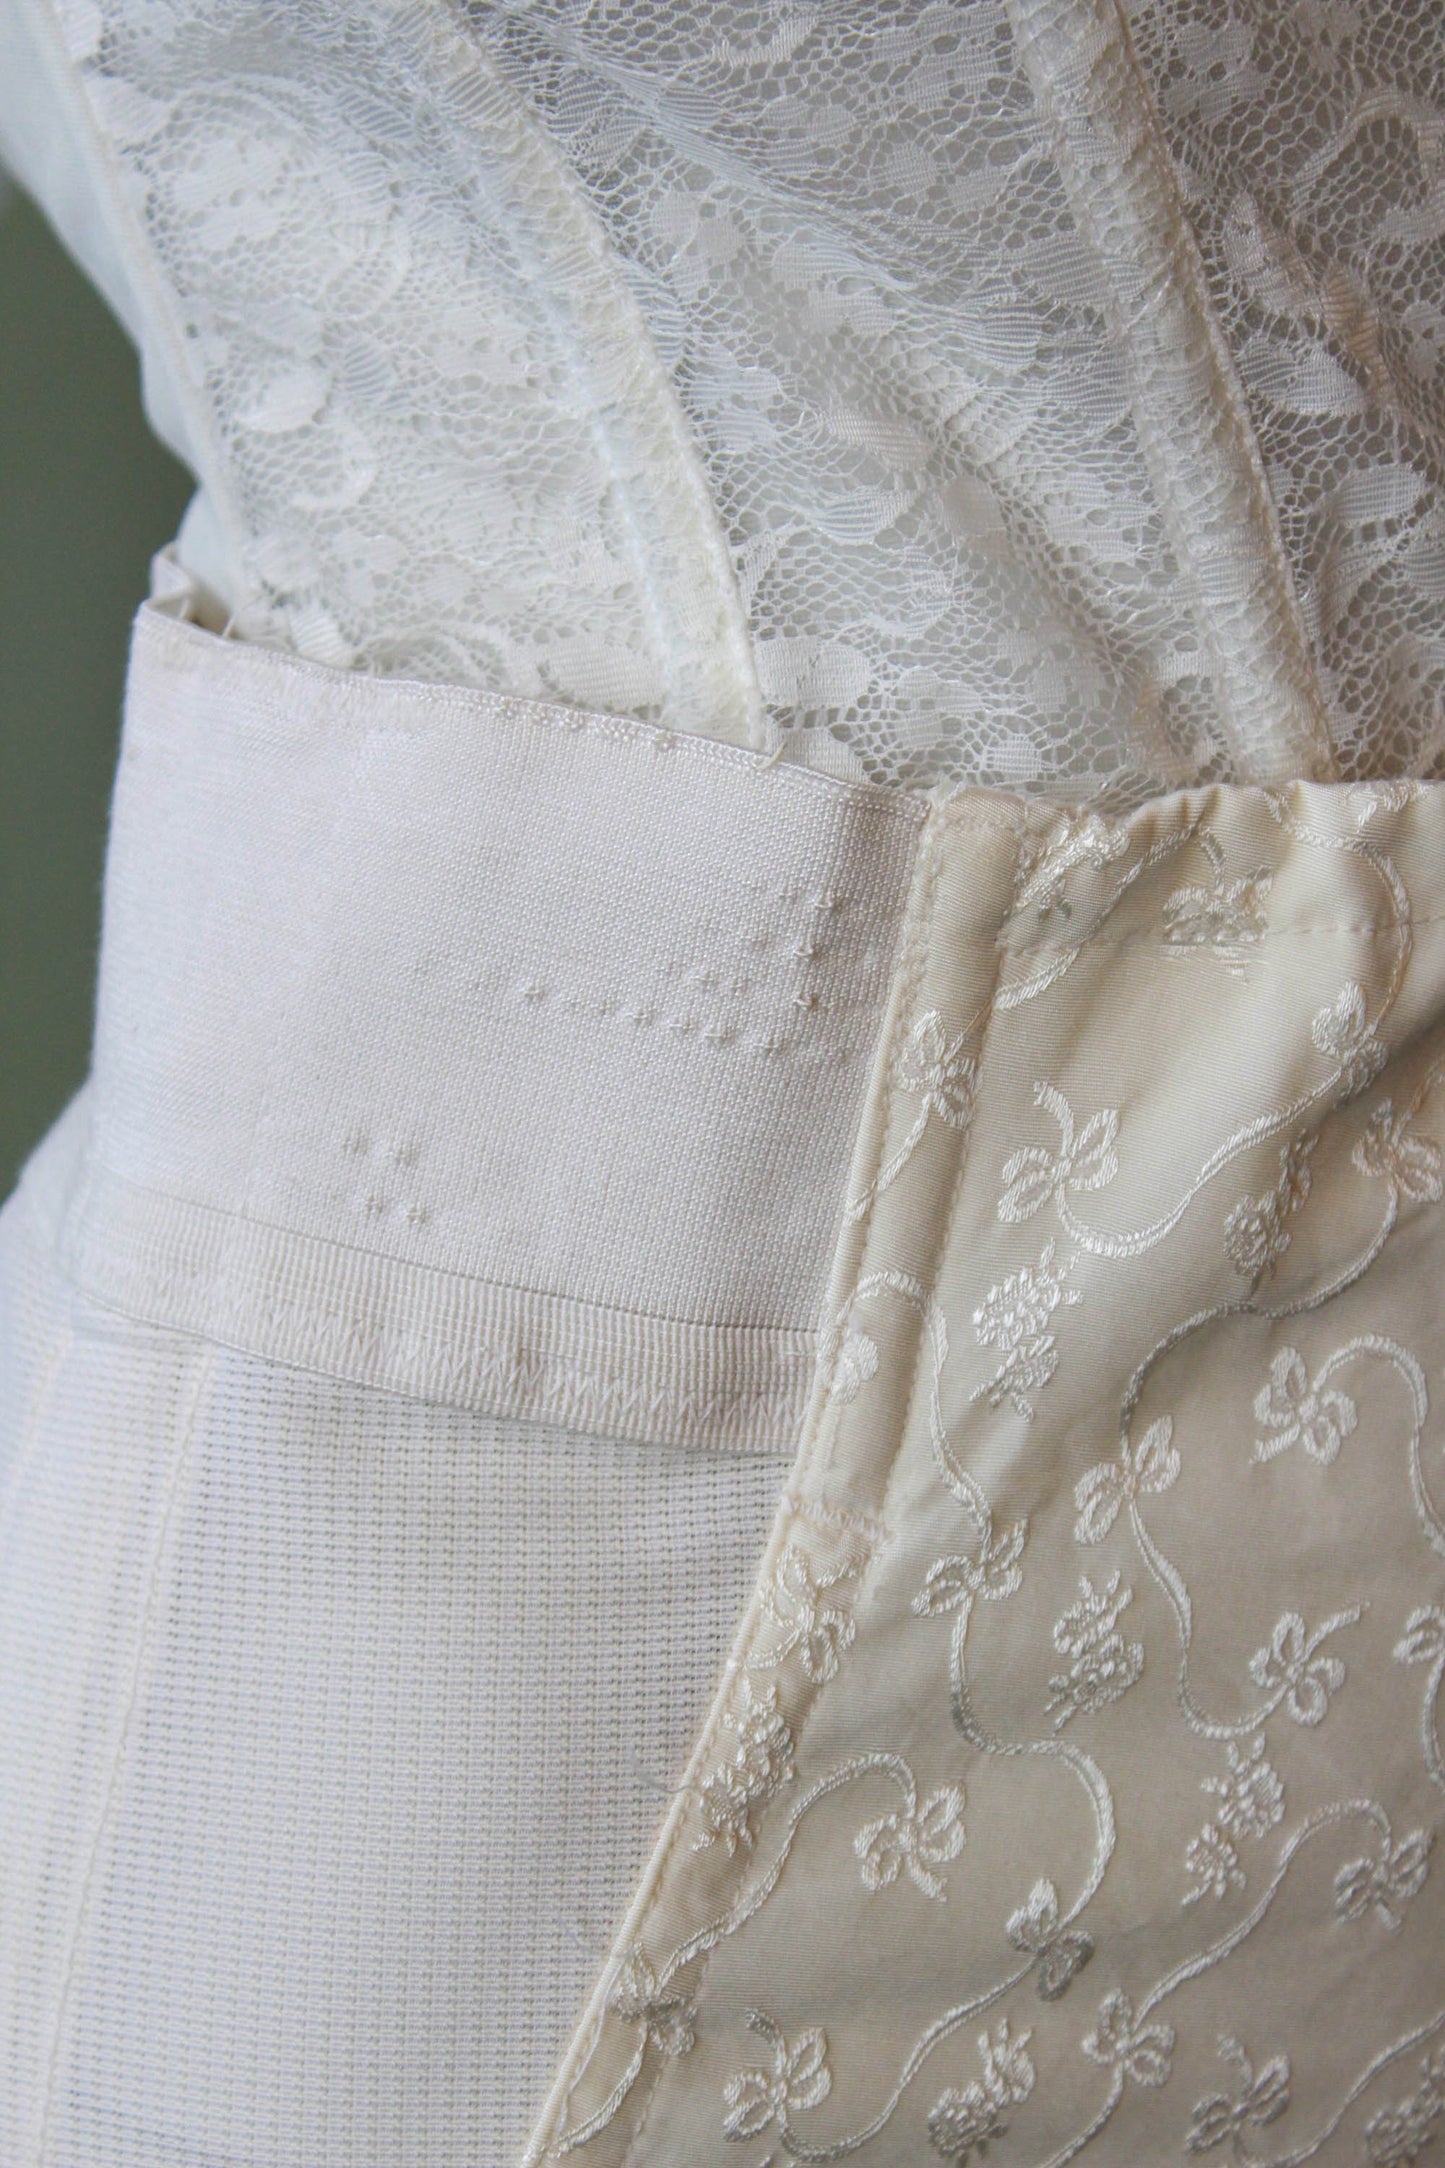 1950s Cream Girdle with Floral Embroidery, 26" Waist